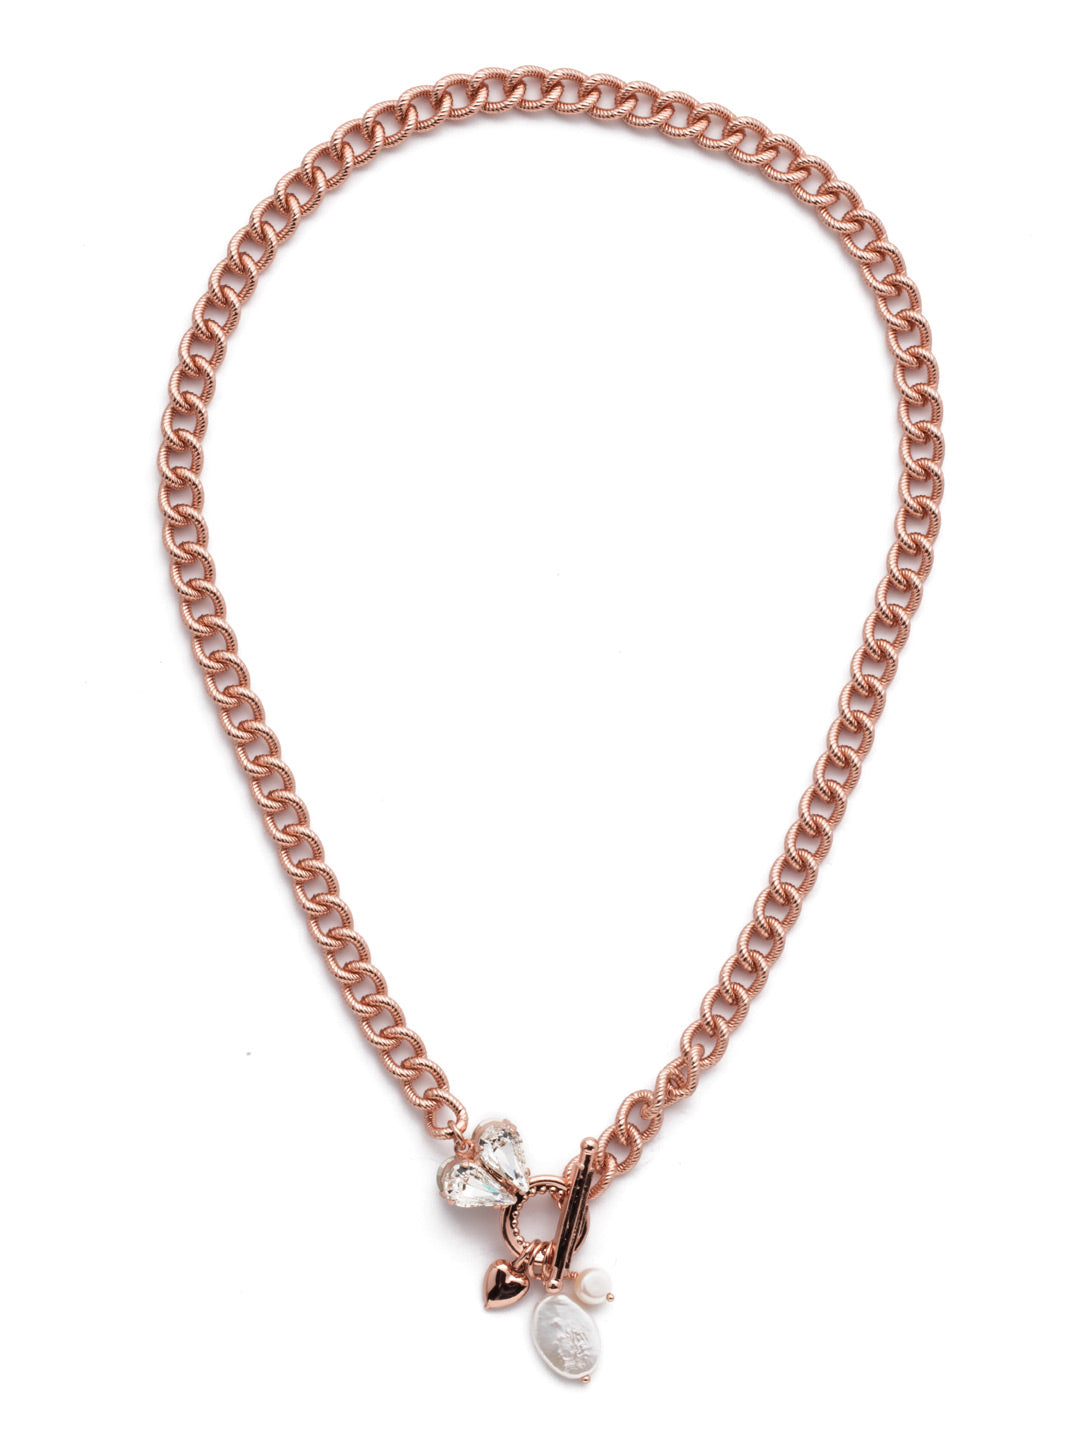 Laguna Pendant Necklace - NER5RGCRY - <p>The Laguna Pendant Necklace makes a strong statement with its metal links, but softens at the center with shimmering crystal and silver hearts joined by freshwater pearl accents. From Sorrelli's Crystal collection in our Rose Gold-tone finish.</p>